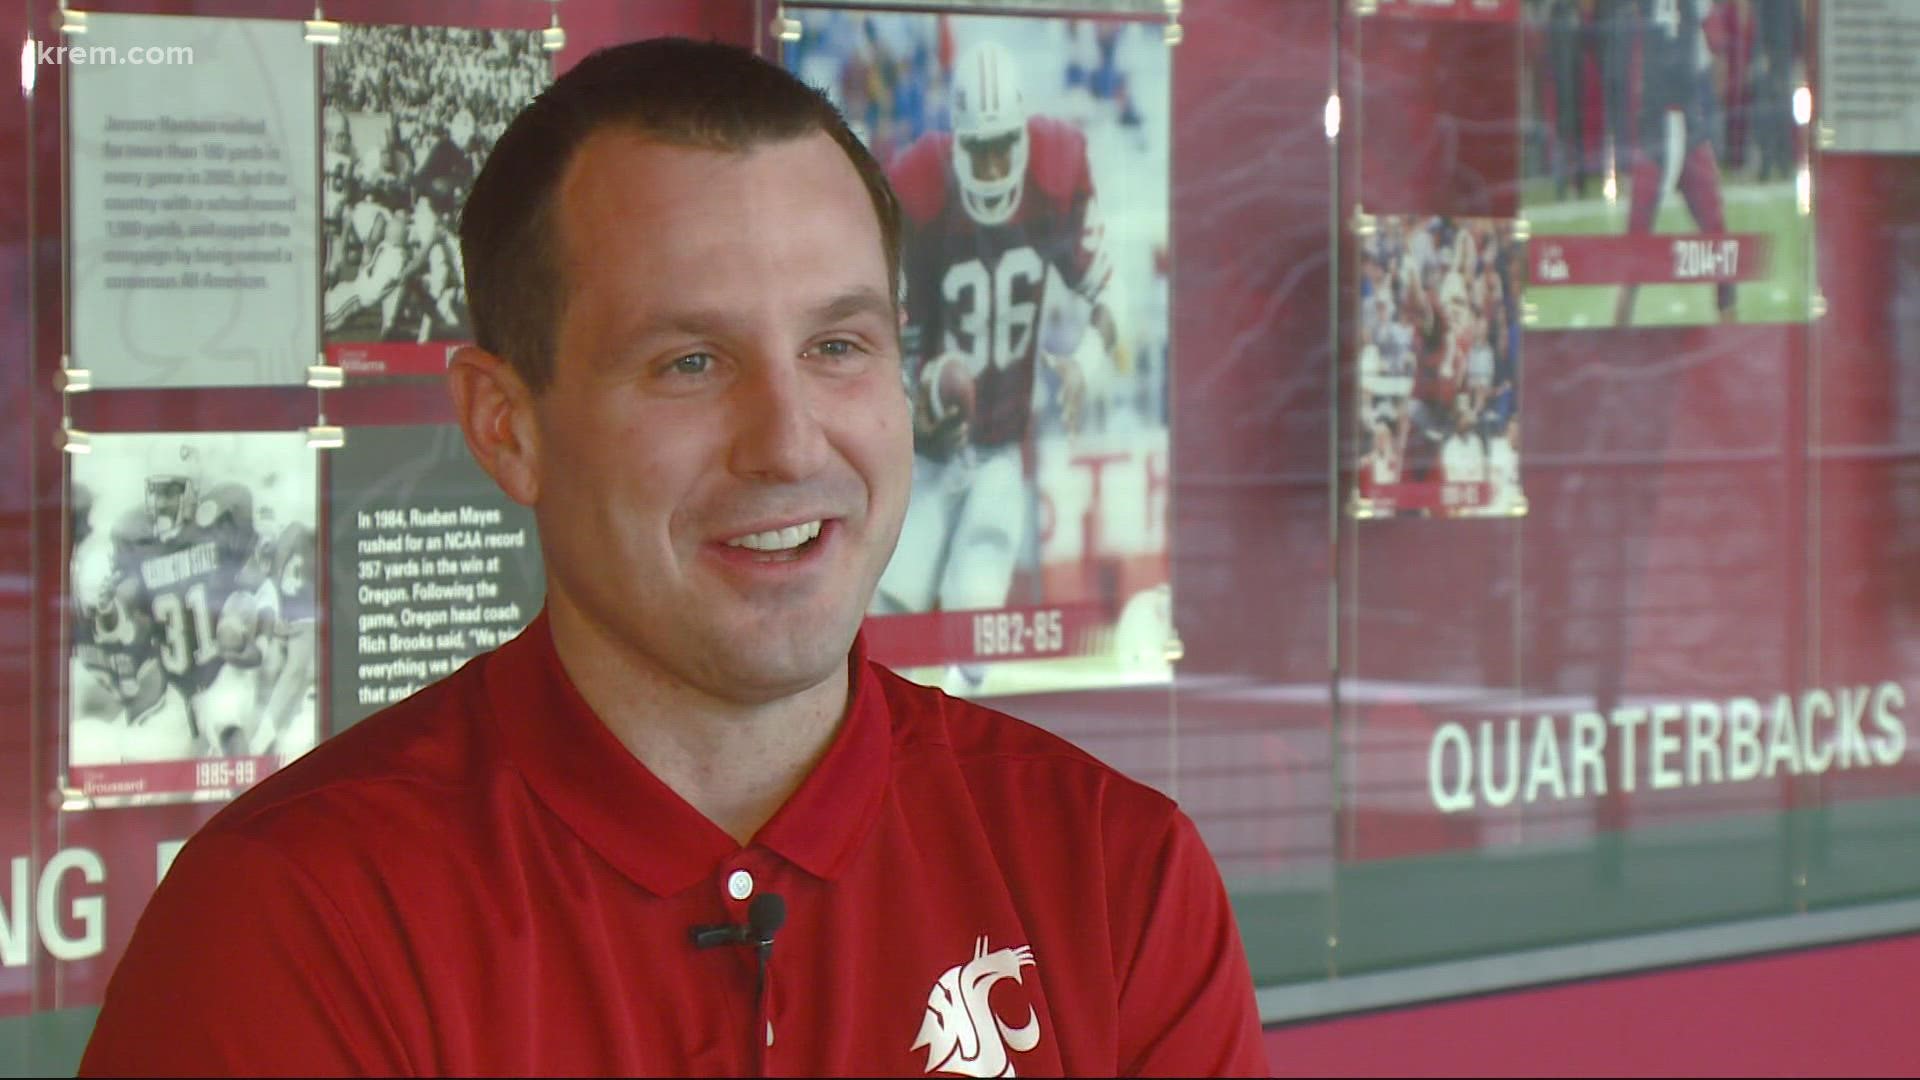 KREM 2's Travis Green sat down with Dickert to discuss his childhood and his journey to becoming a head coach.